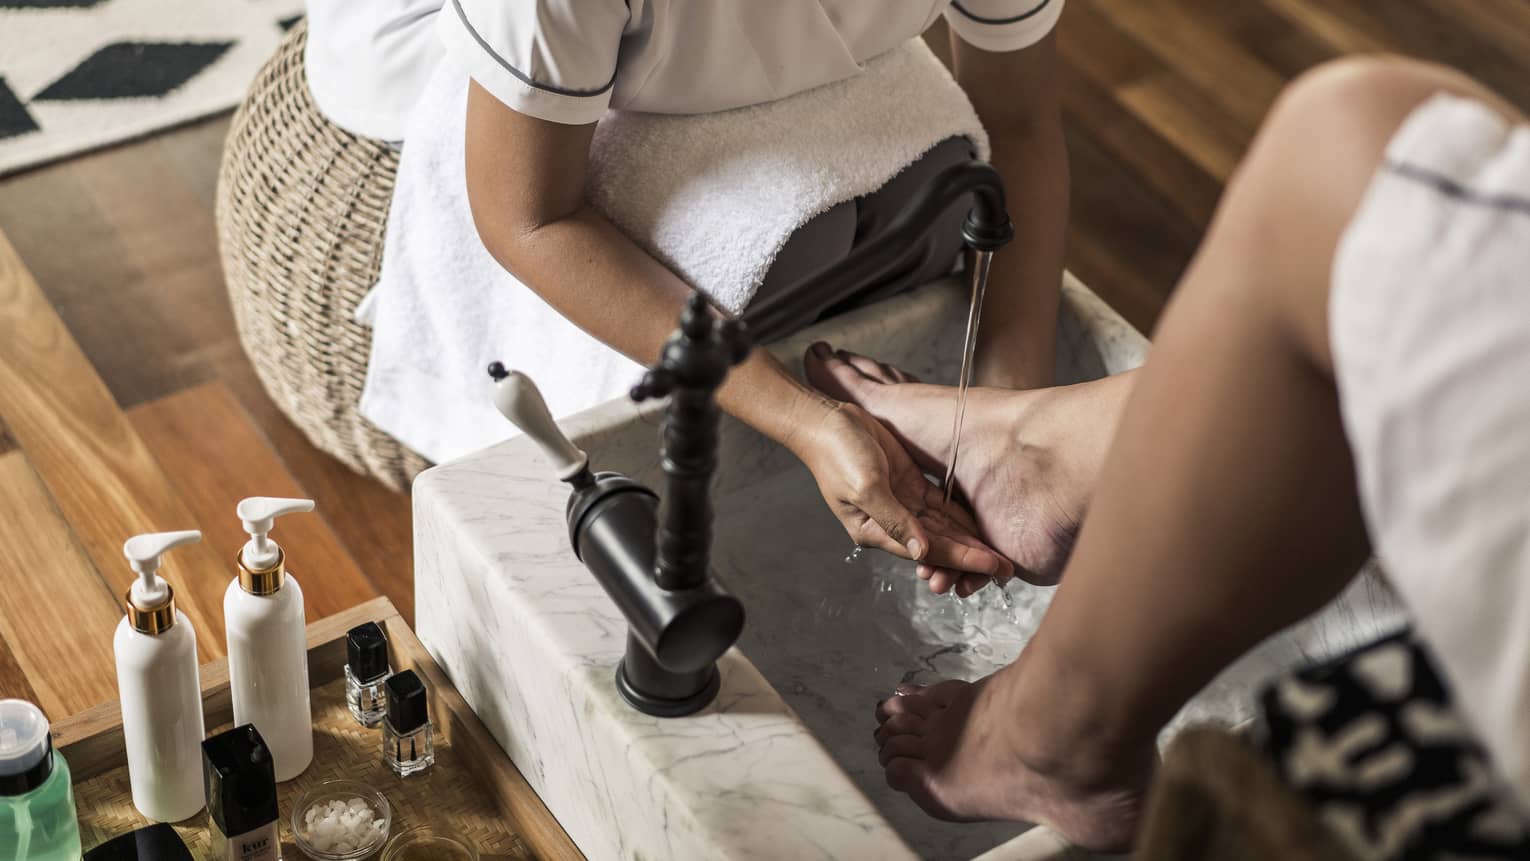 Spa staff sits on wicker stool, rinses woman's feet at pedicure station